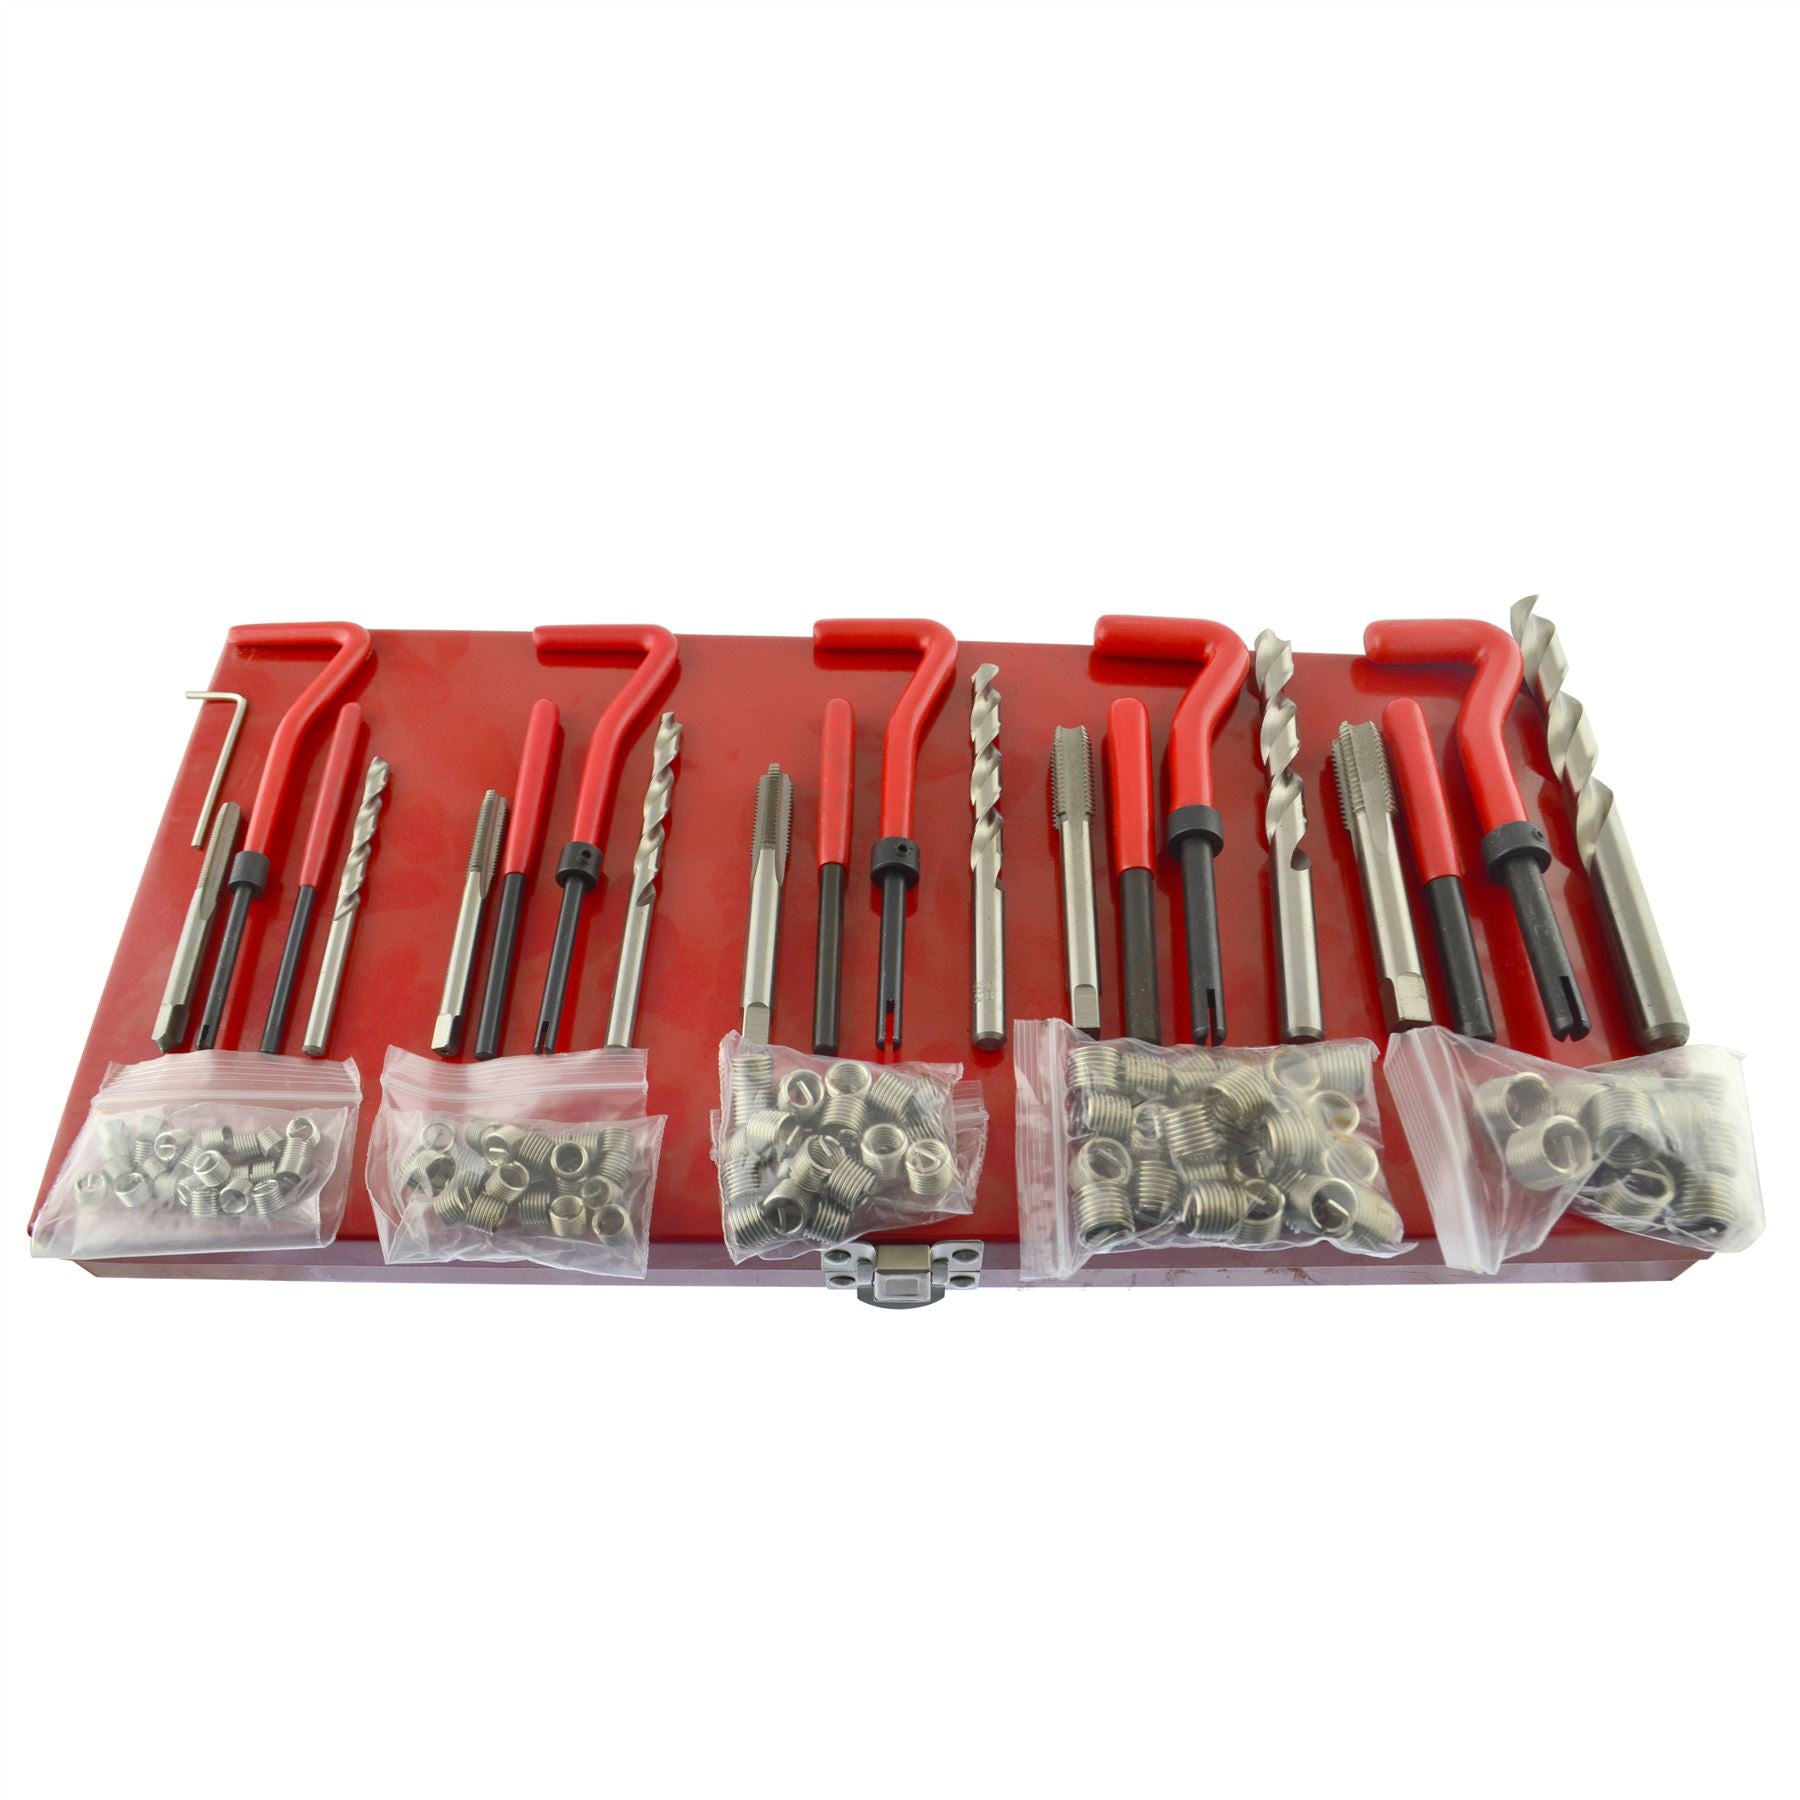 Thread installation and repair kit helicoil set 131pc metric sizes M5-M12 AN133